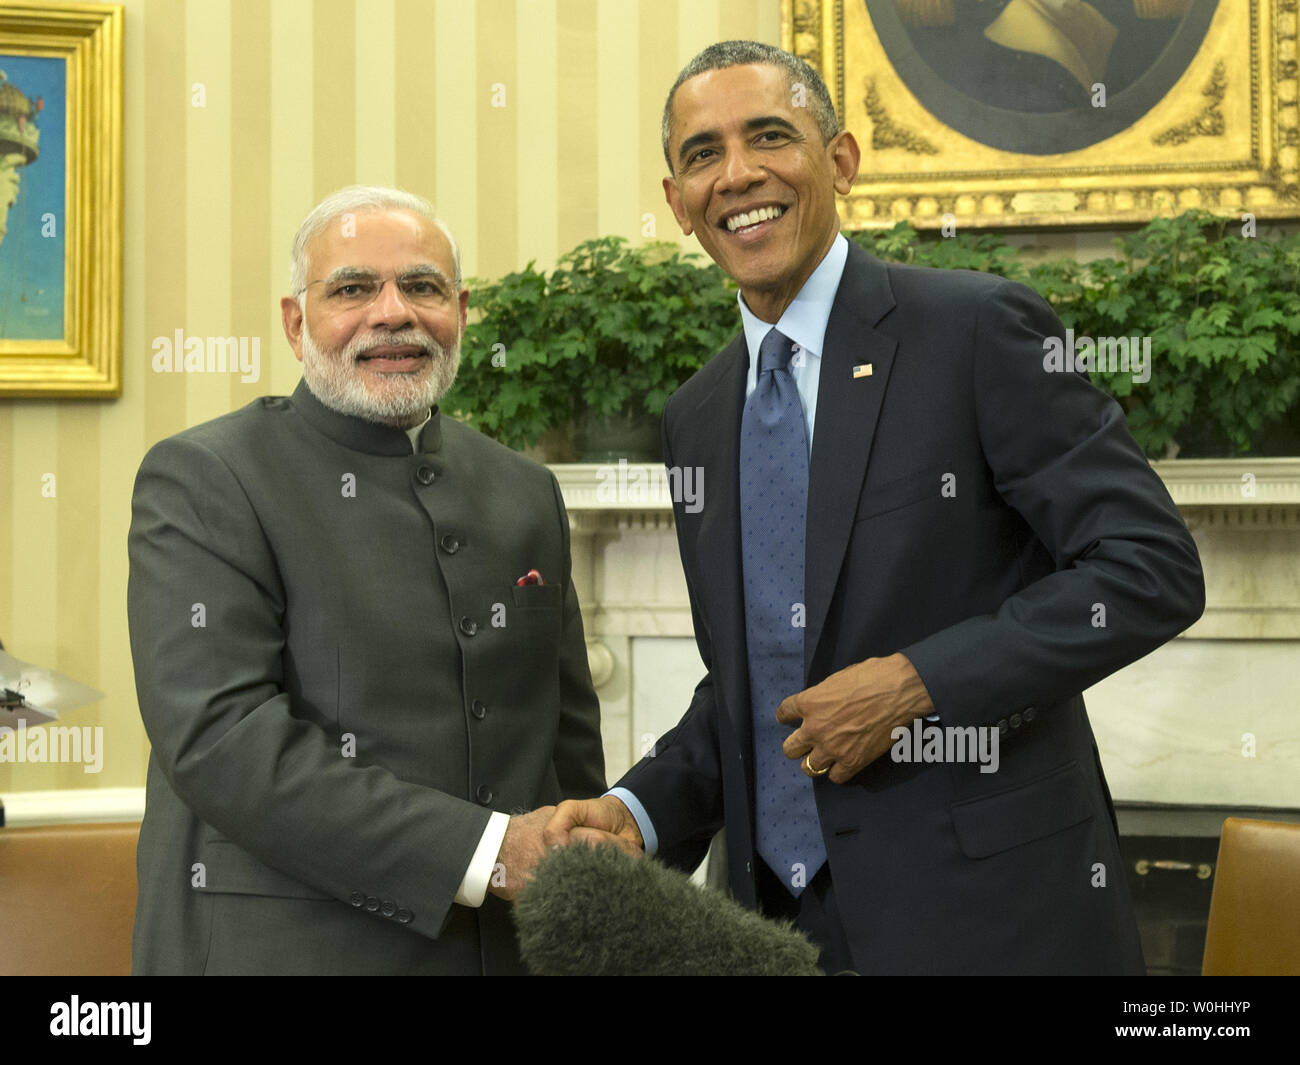 U.S. President Barack Obama (L) shakes hands with Indian Prime Minister  Narendra Modi following a meeting in the Oval Office at the White House,  September 30, 2014 in Washington, DC. The two